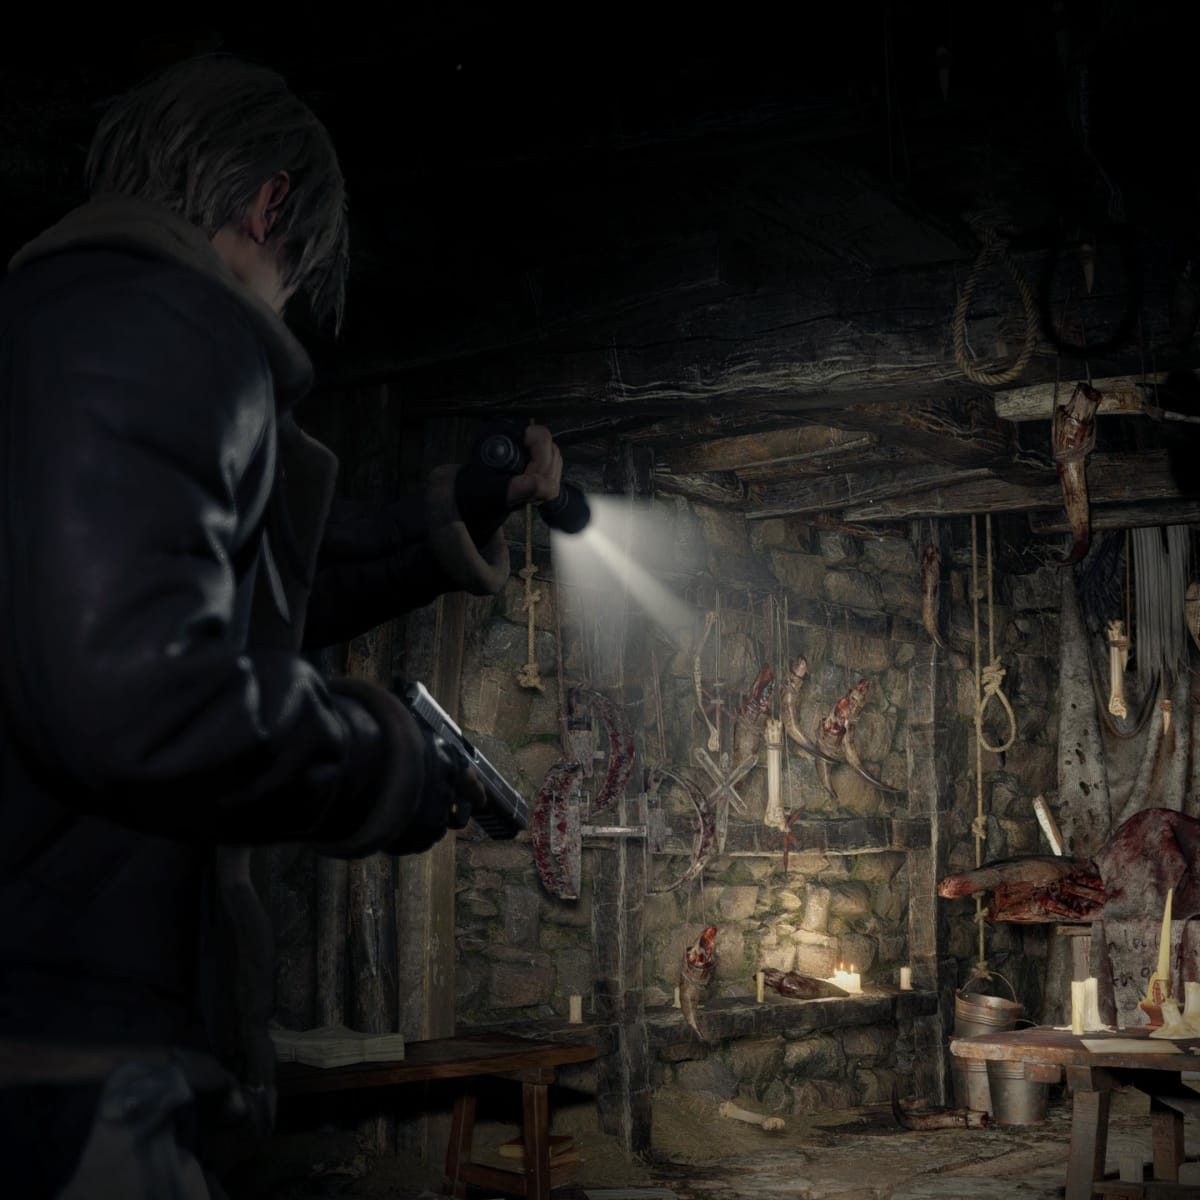 Resident Evil 4 Remake PC System Requirements - GINX TV